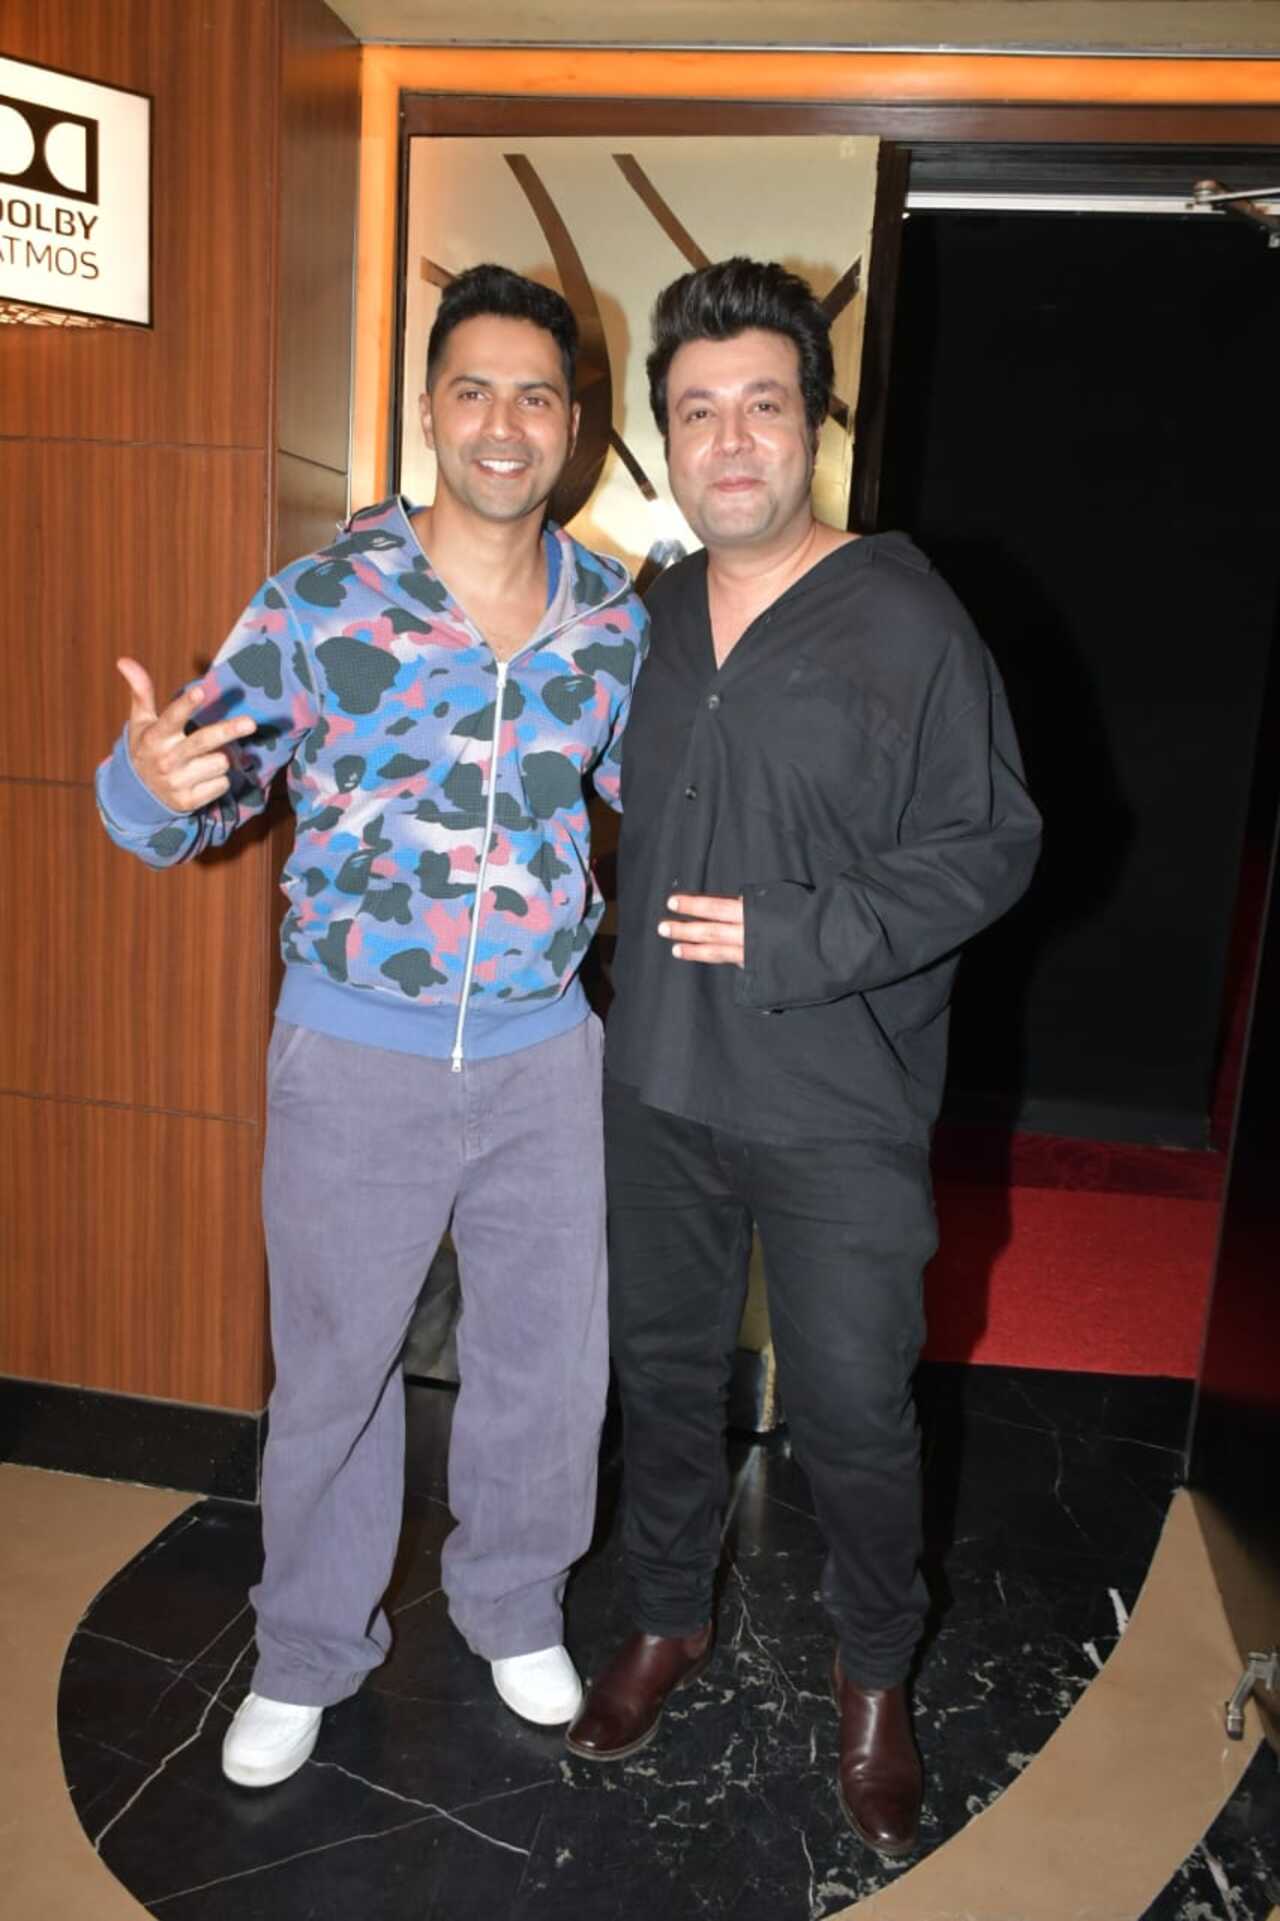 Varun Dhawan was seen hugging and posing with Varun Sharma. The two have previously worked together in Dilwale where they were seen playing childhood best friends